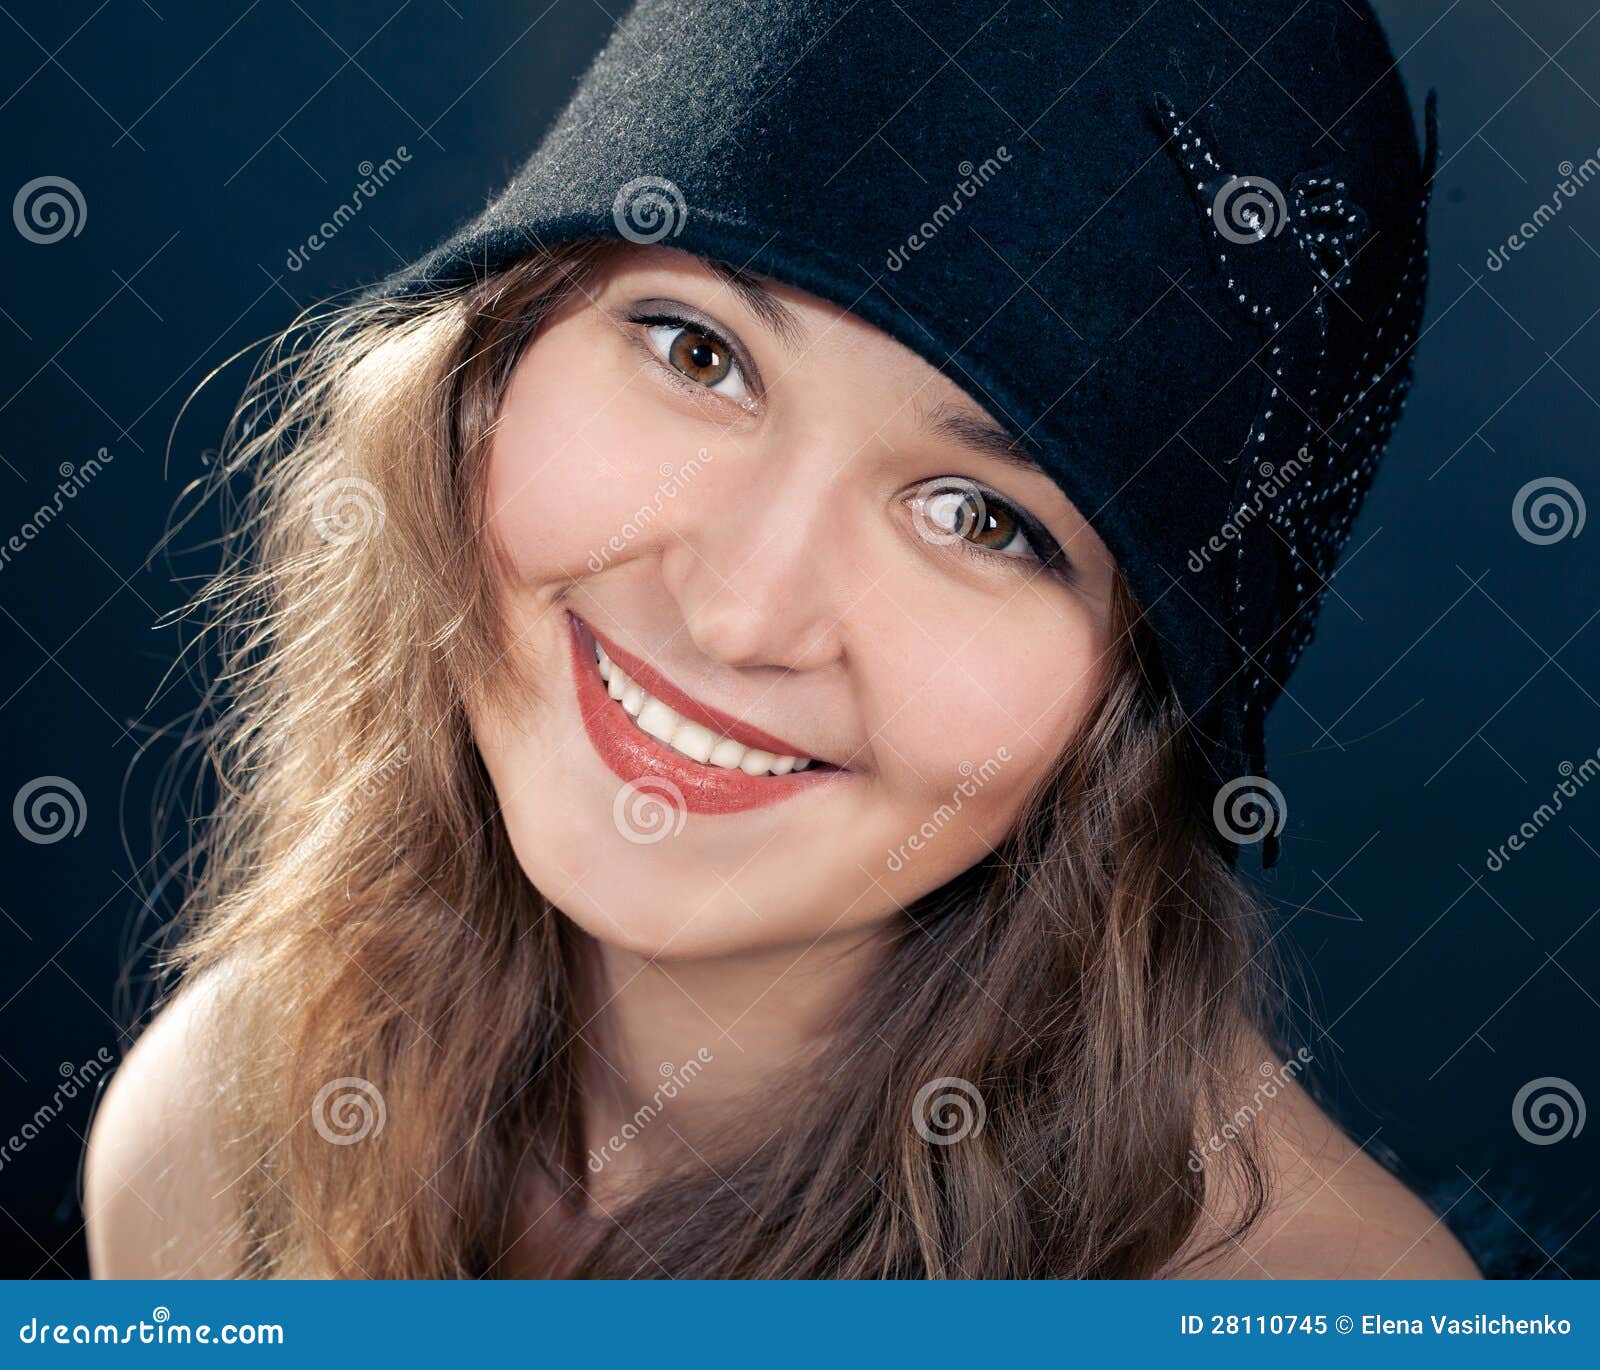 Woman Wearing Black Felt Hat in Retro Stlyle Stock Image - Image of ...